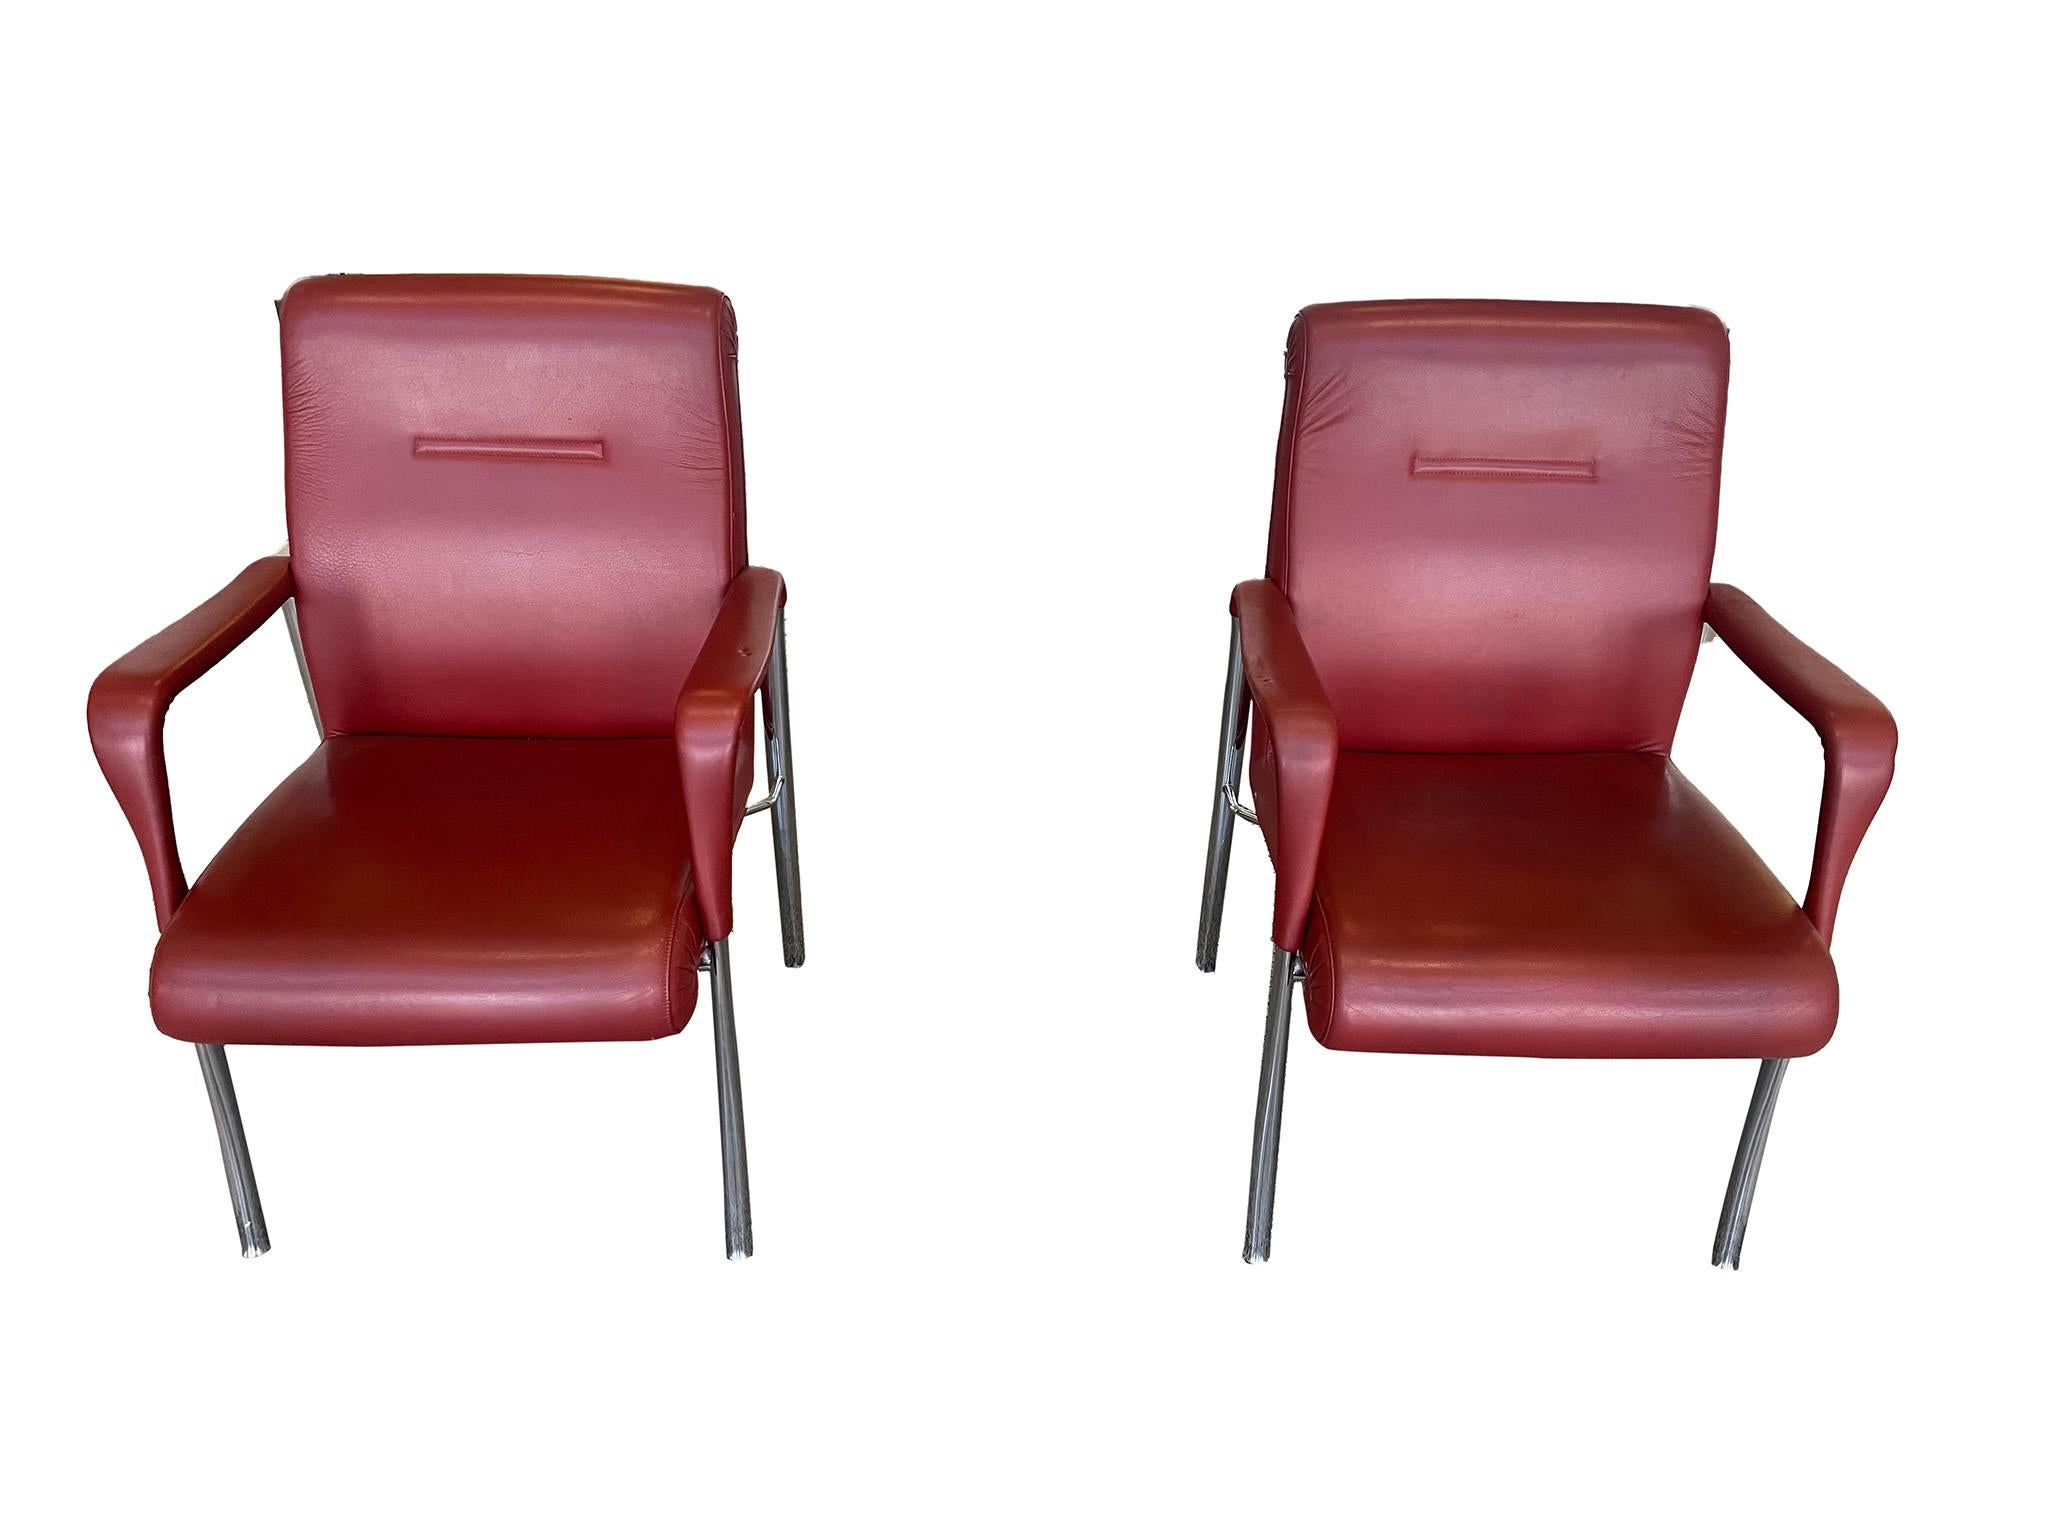 20th Century Three Leather Dining or Office Chairs by Poltrona Frau in Oxblood Red Leather For Sale